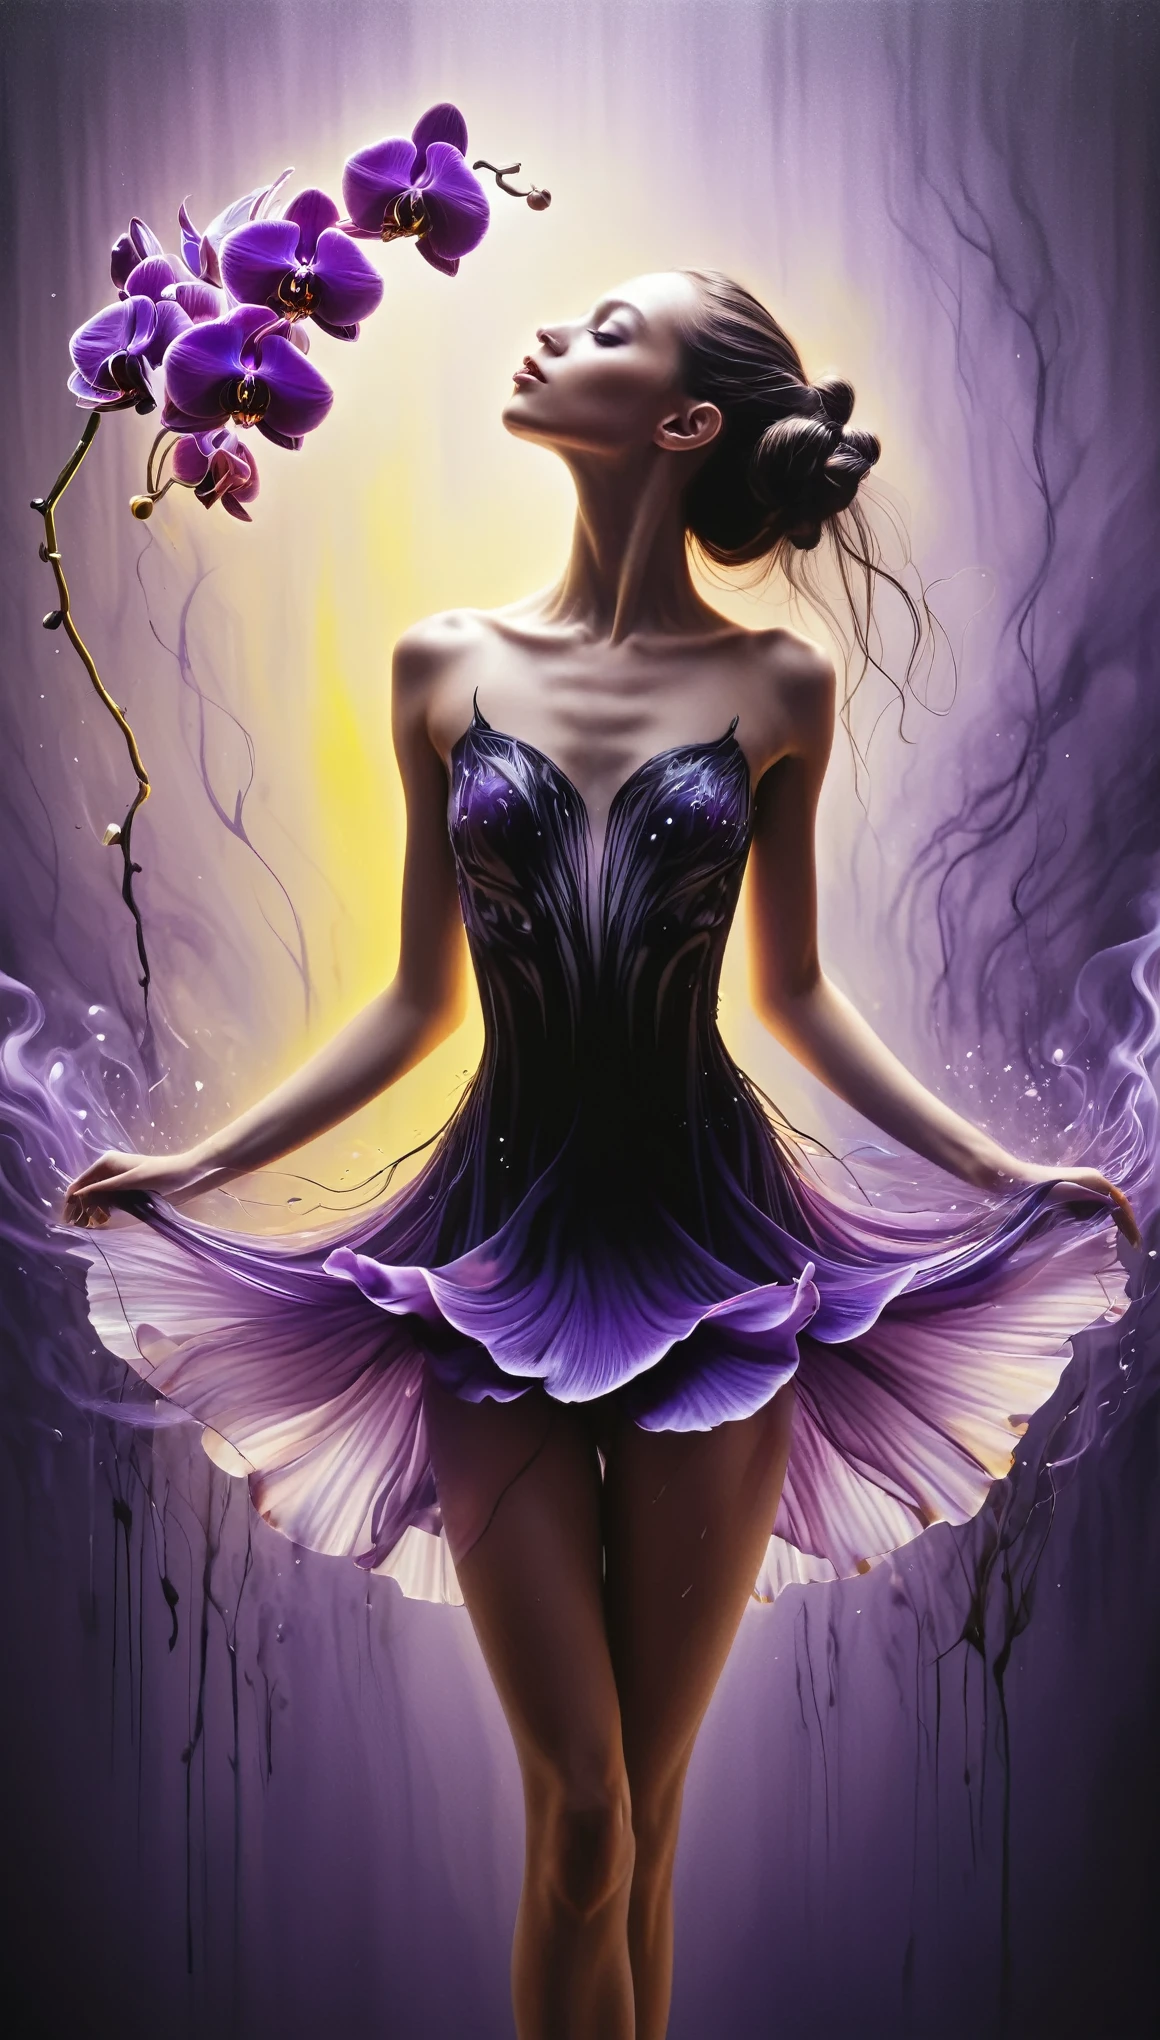 Hyper-realistic airbrushed drawing in the style of Marc Allante and Alan Aldridge, a black and purple orchid transitioning into a girl with a mystical double exposure, strands of her hair transforming into delicate leaves and petals that flutter with the motion of a ballerina, the scene bathed in magic yellow smoke that weaves through the composition, nature seamlessly blending with fantasy in a surreal dance of light and color